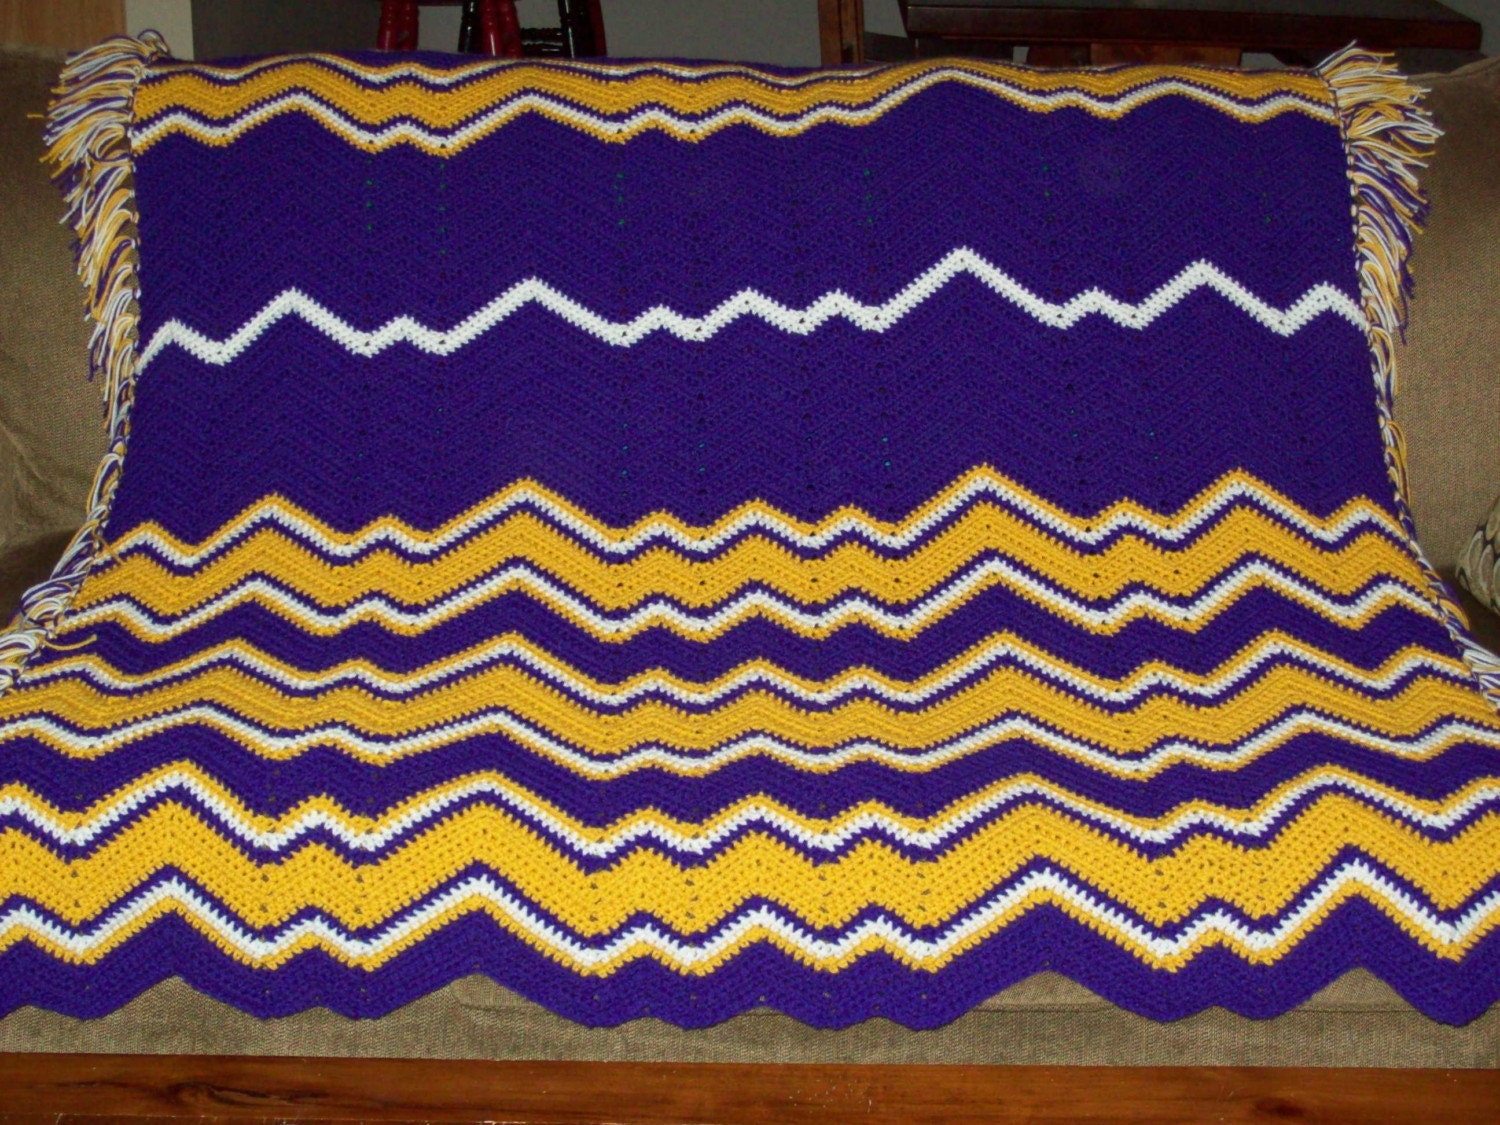 RESERVED LISTING - LOS ANGELES LAKERS COLORS BLANKET